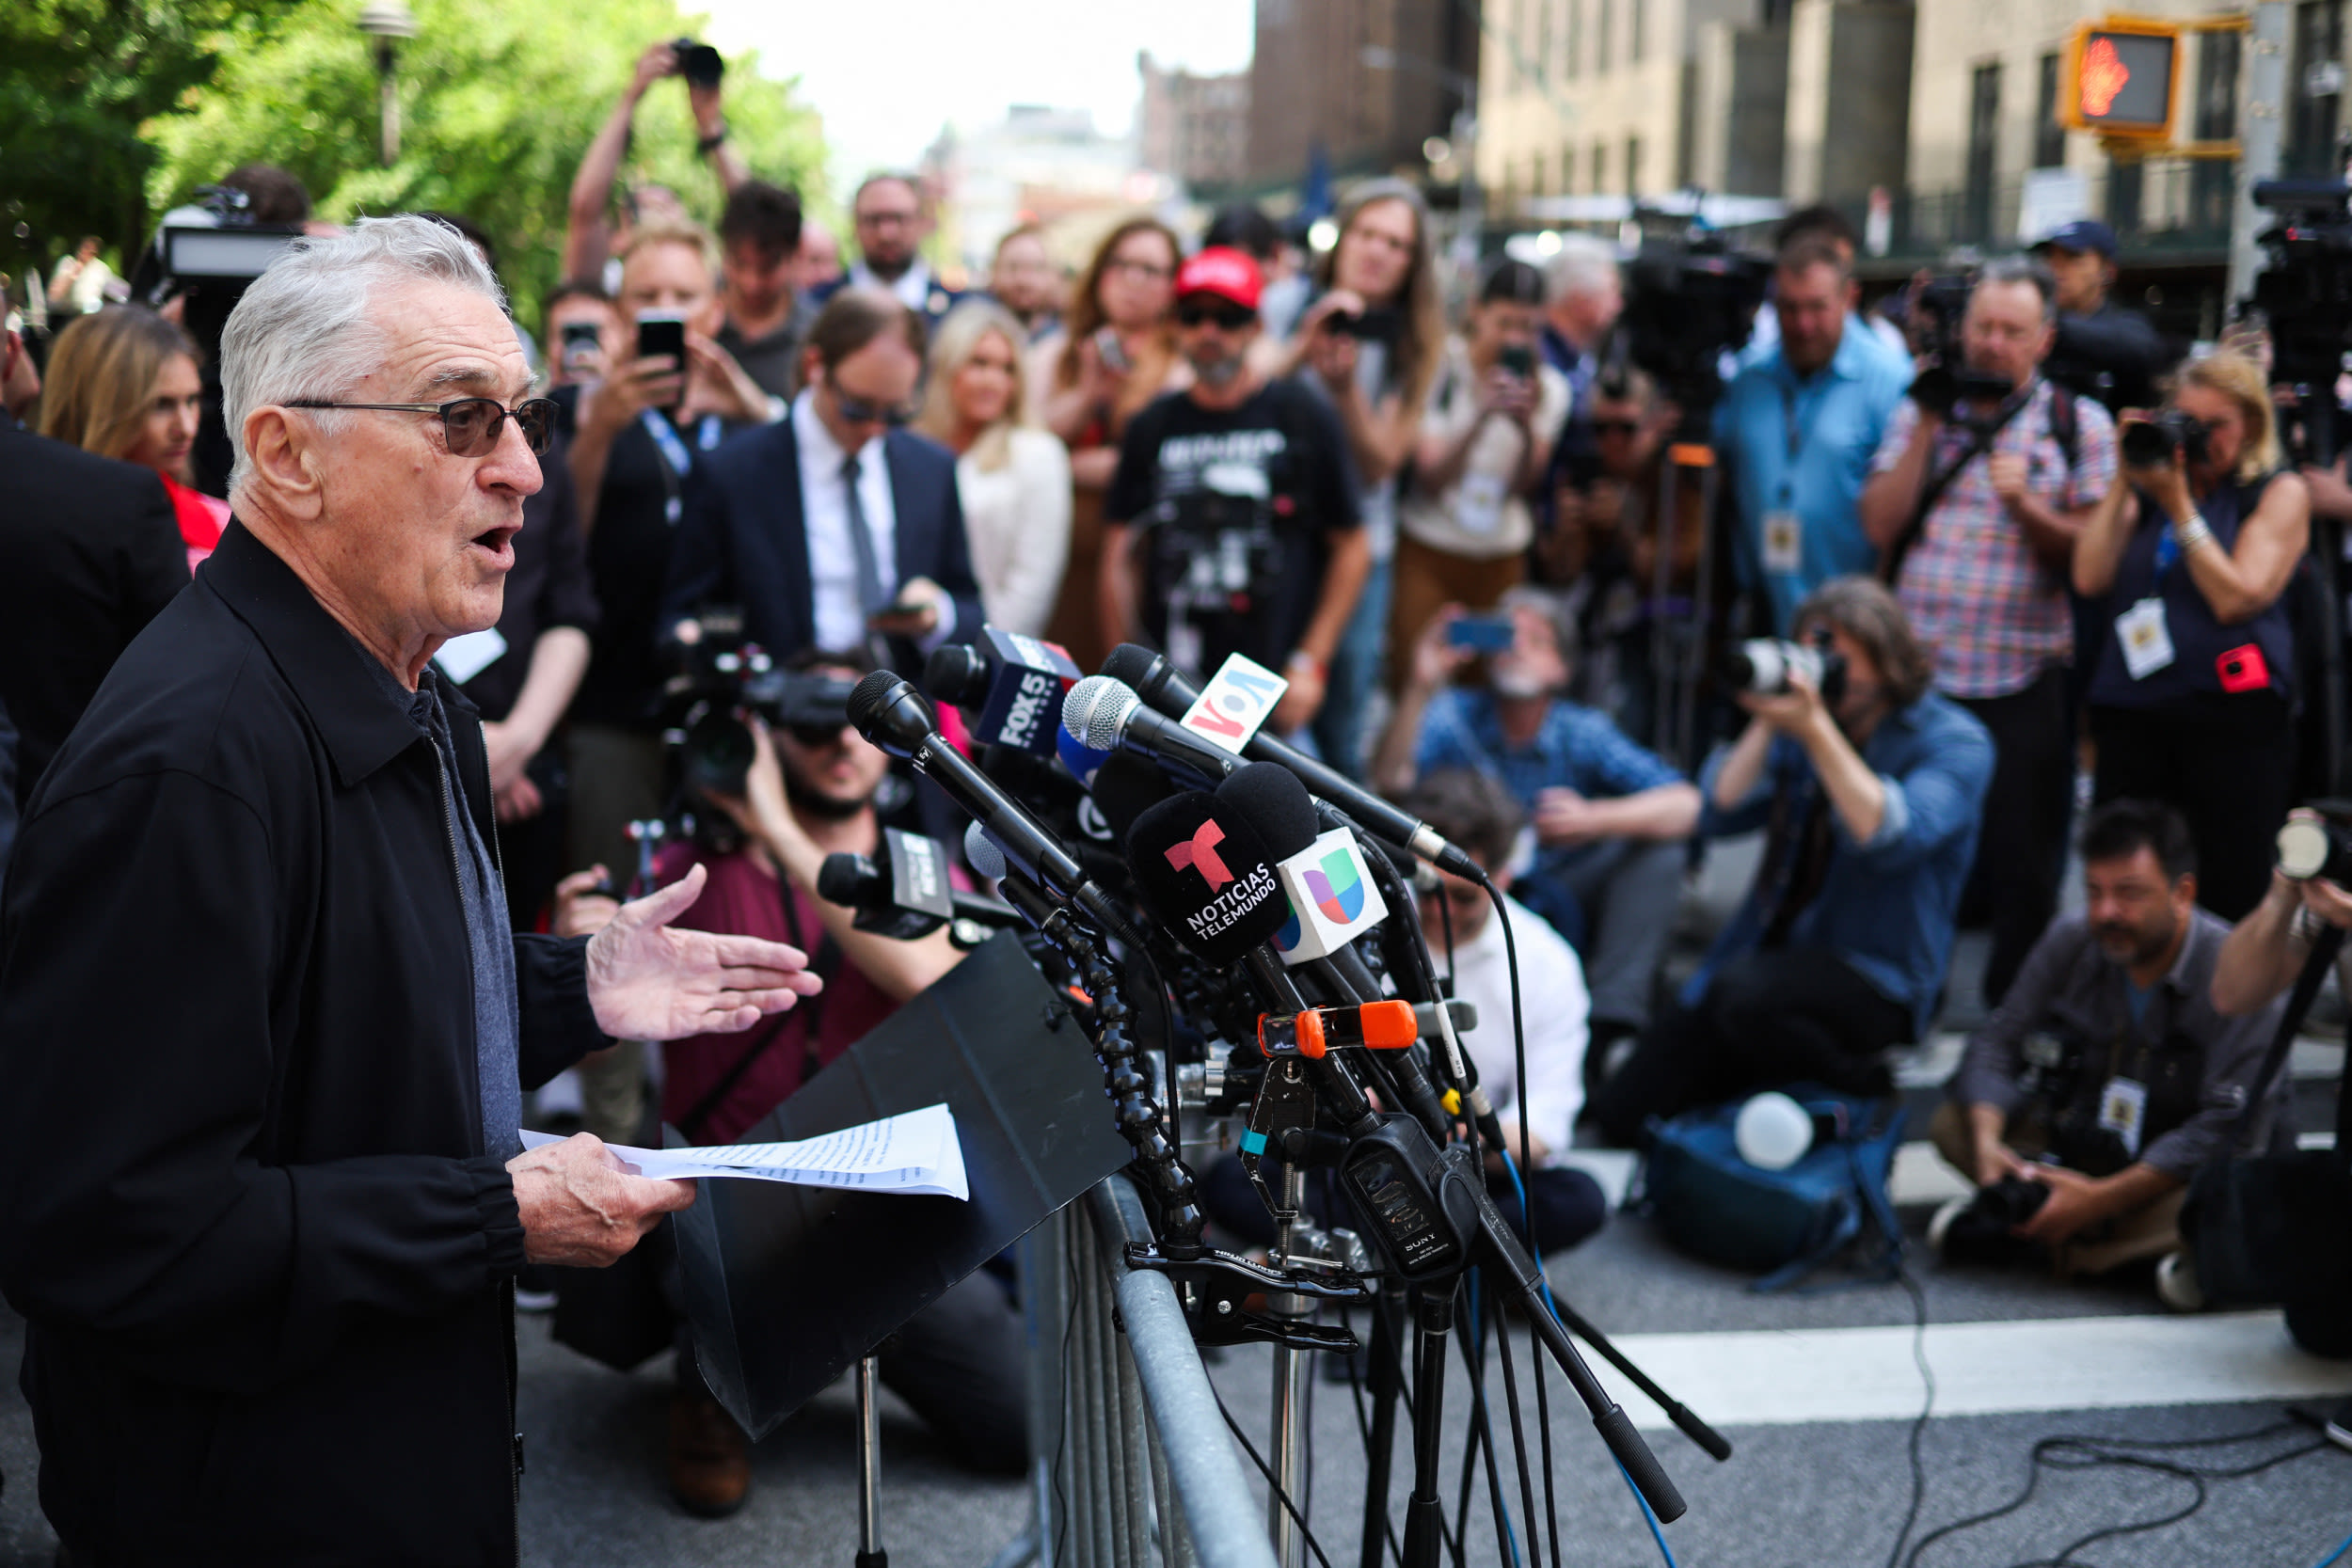 Robert De Niro clashes with Trump supporters outside court